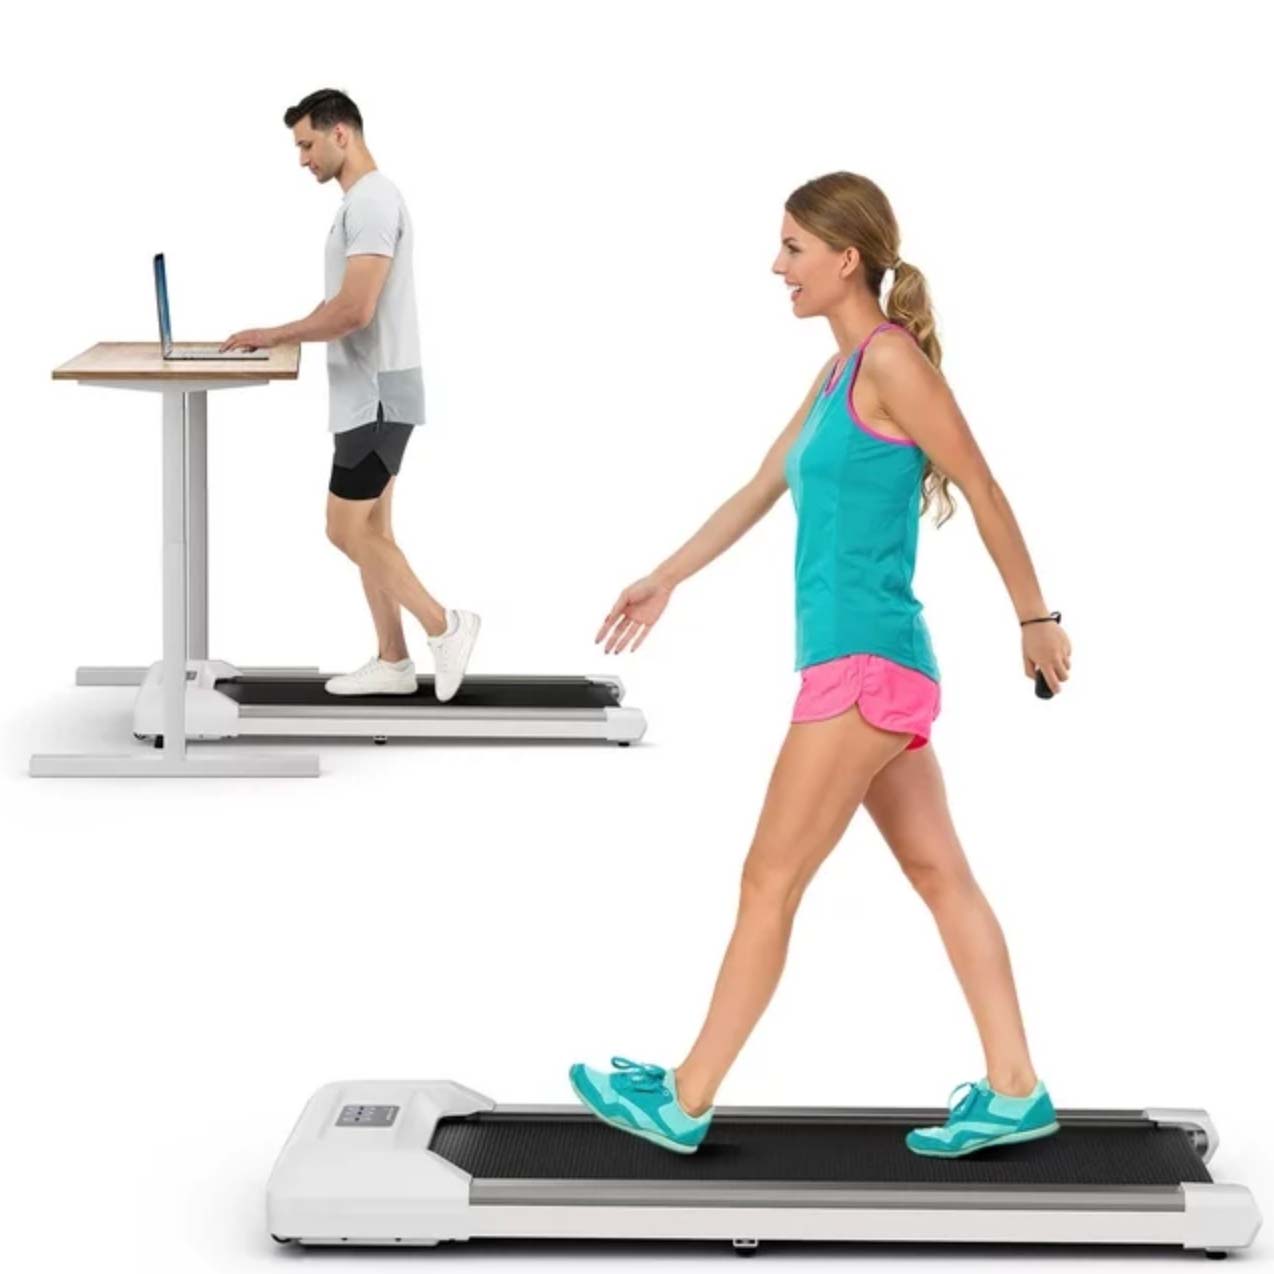 Men working while walking on treadmill and woman walking on treadmill